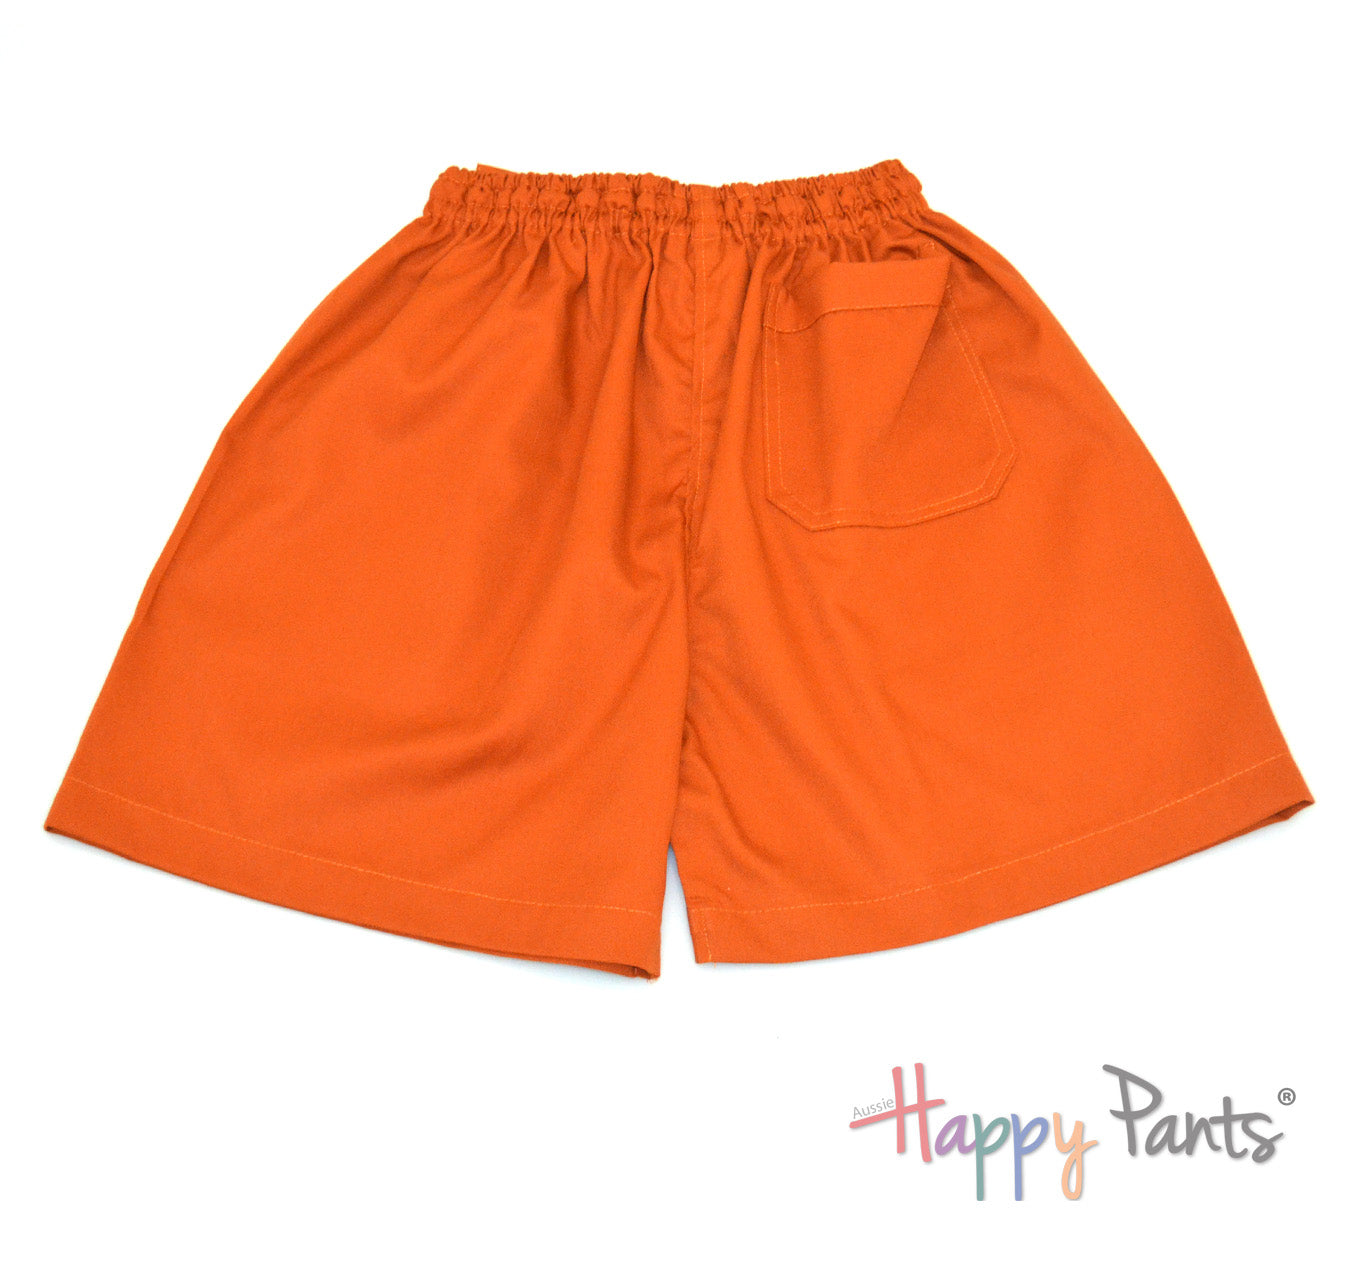 Colourful shorts for ladies and men cotton boardshorts comfortable plus sizes